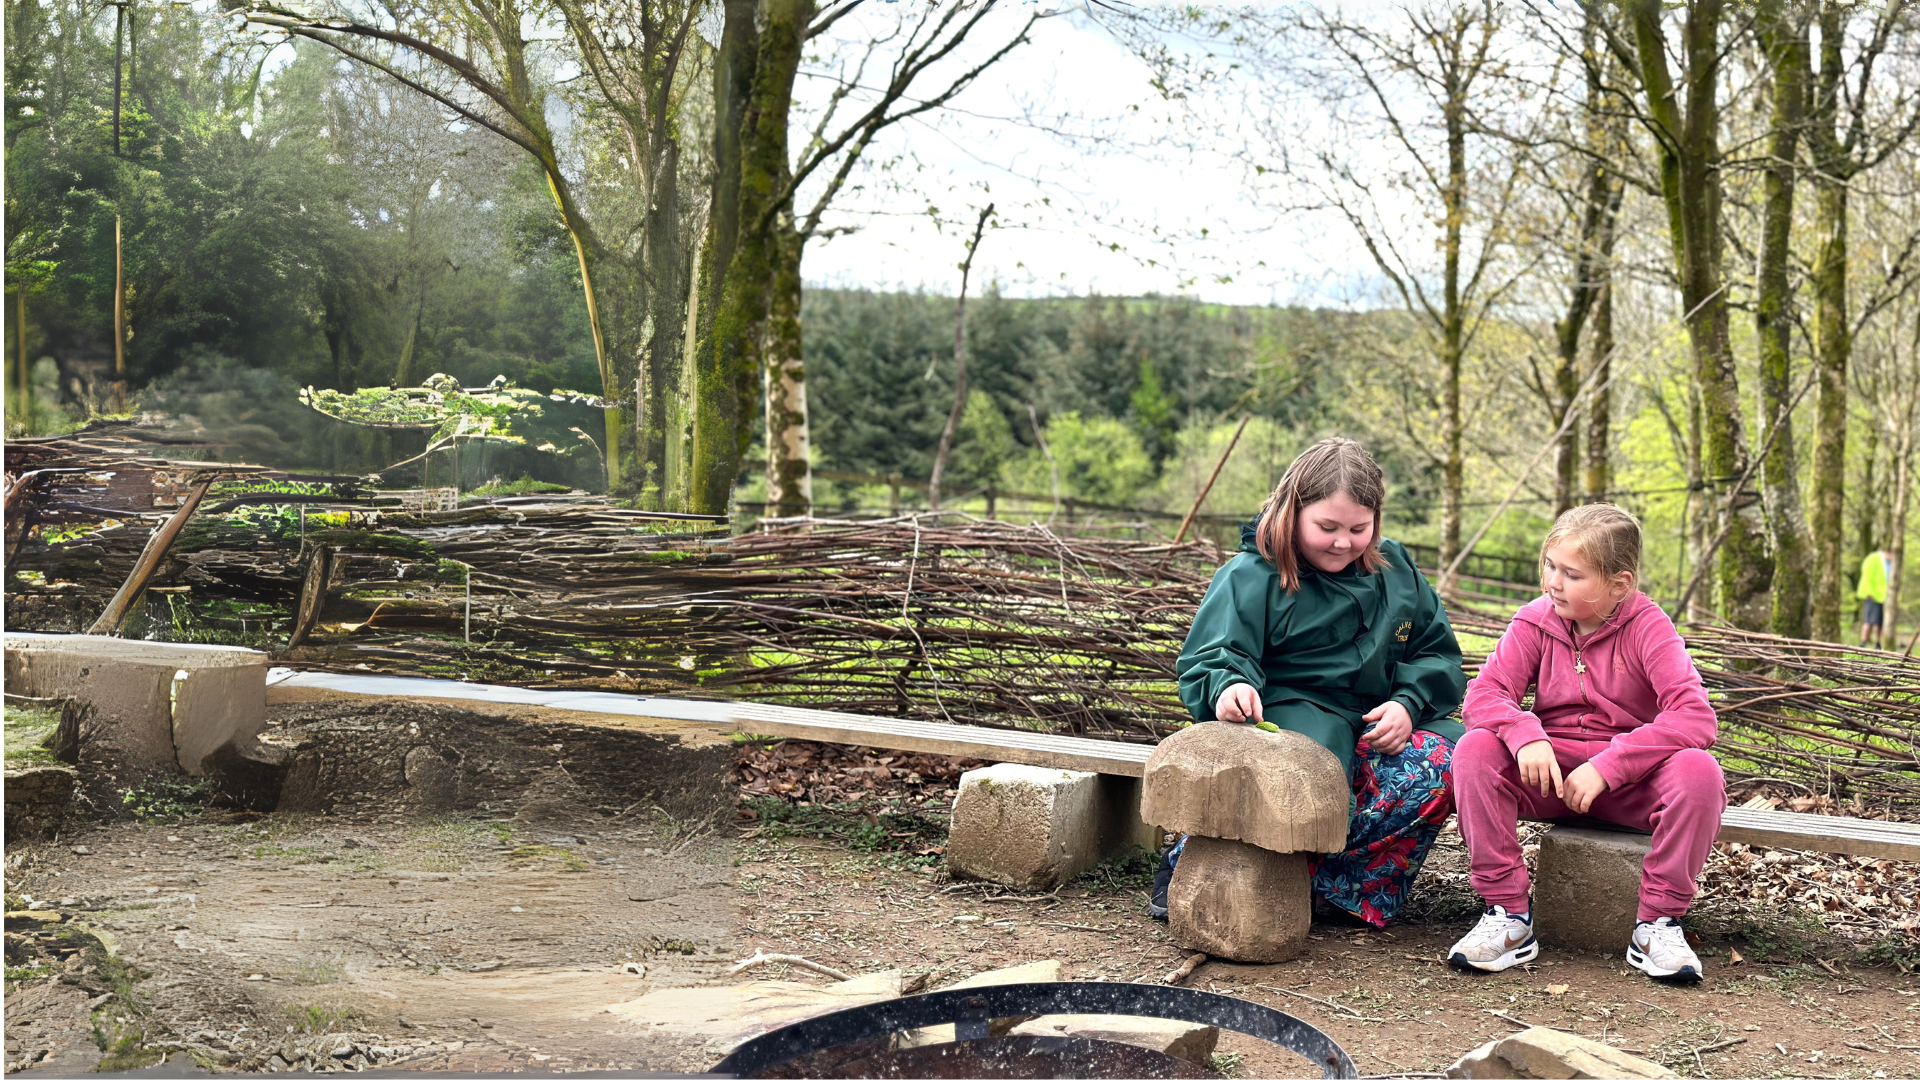 Two young girls are sitting on a bench in the outdoors, with woven planted fencing behind and under trees in a woodland. They are looking at a leaf together and smiling.